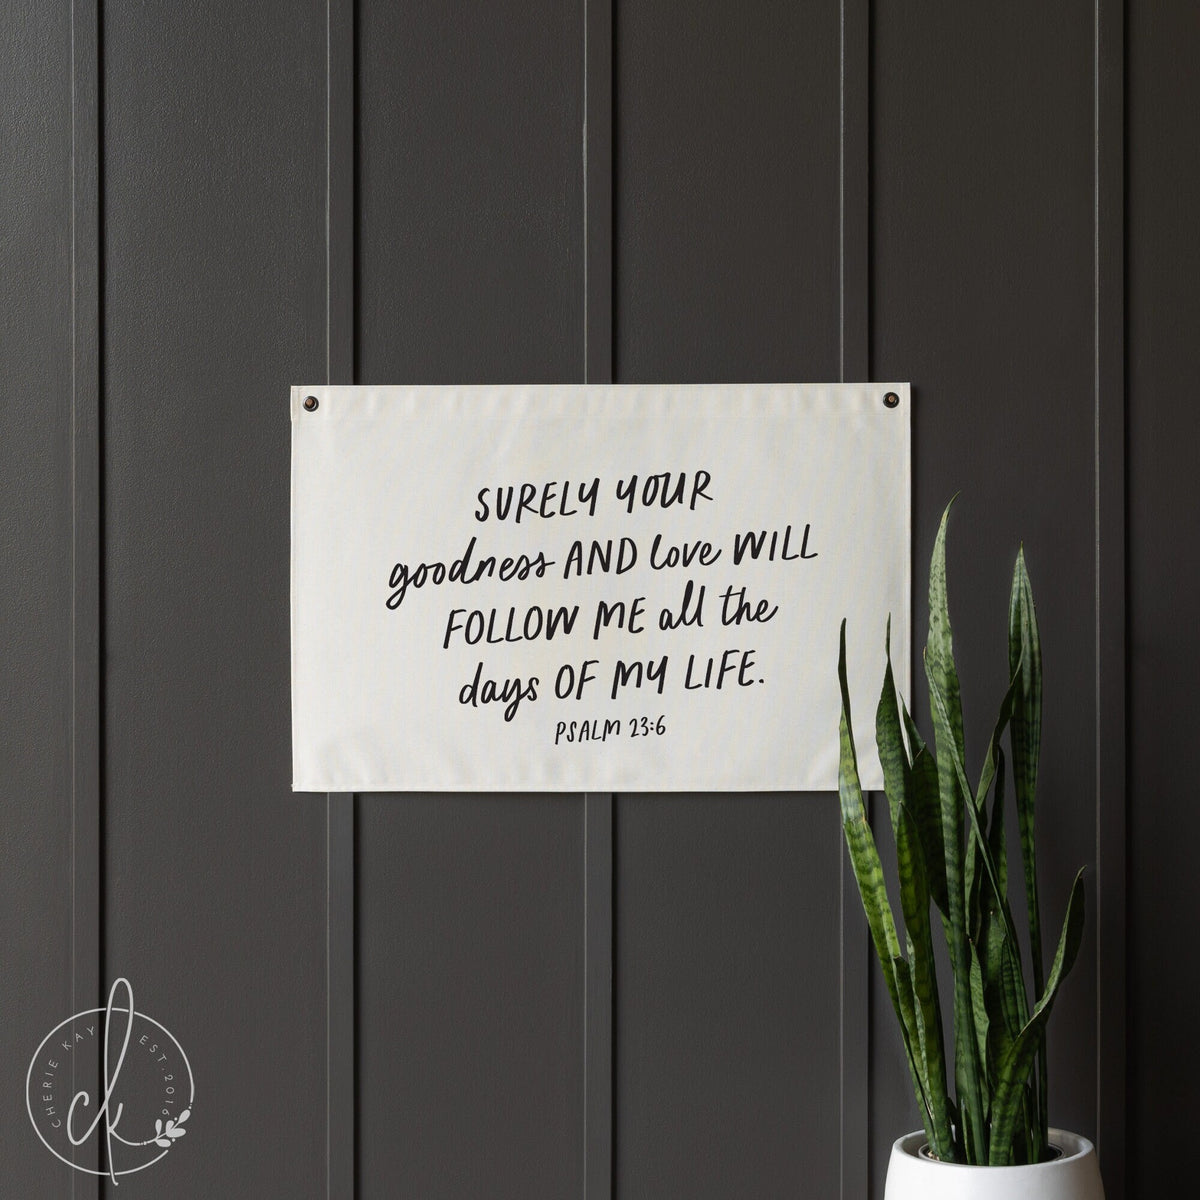 Surely Your Goodness And Love Will Follow Me All The Days Of My Life | Canvas Flag Banner | Scripture Wall Art | Psalm 23:6